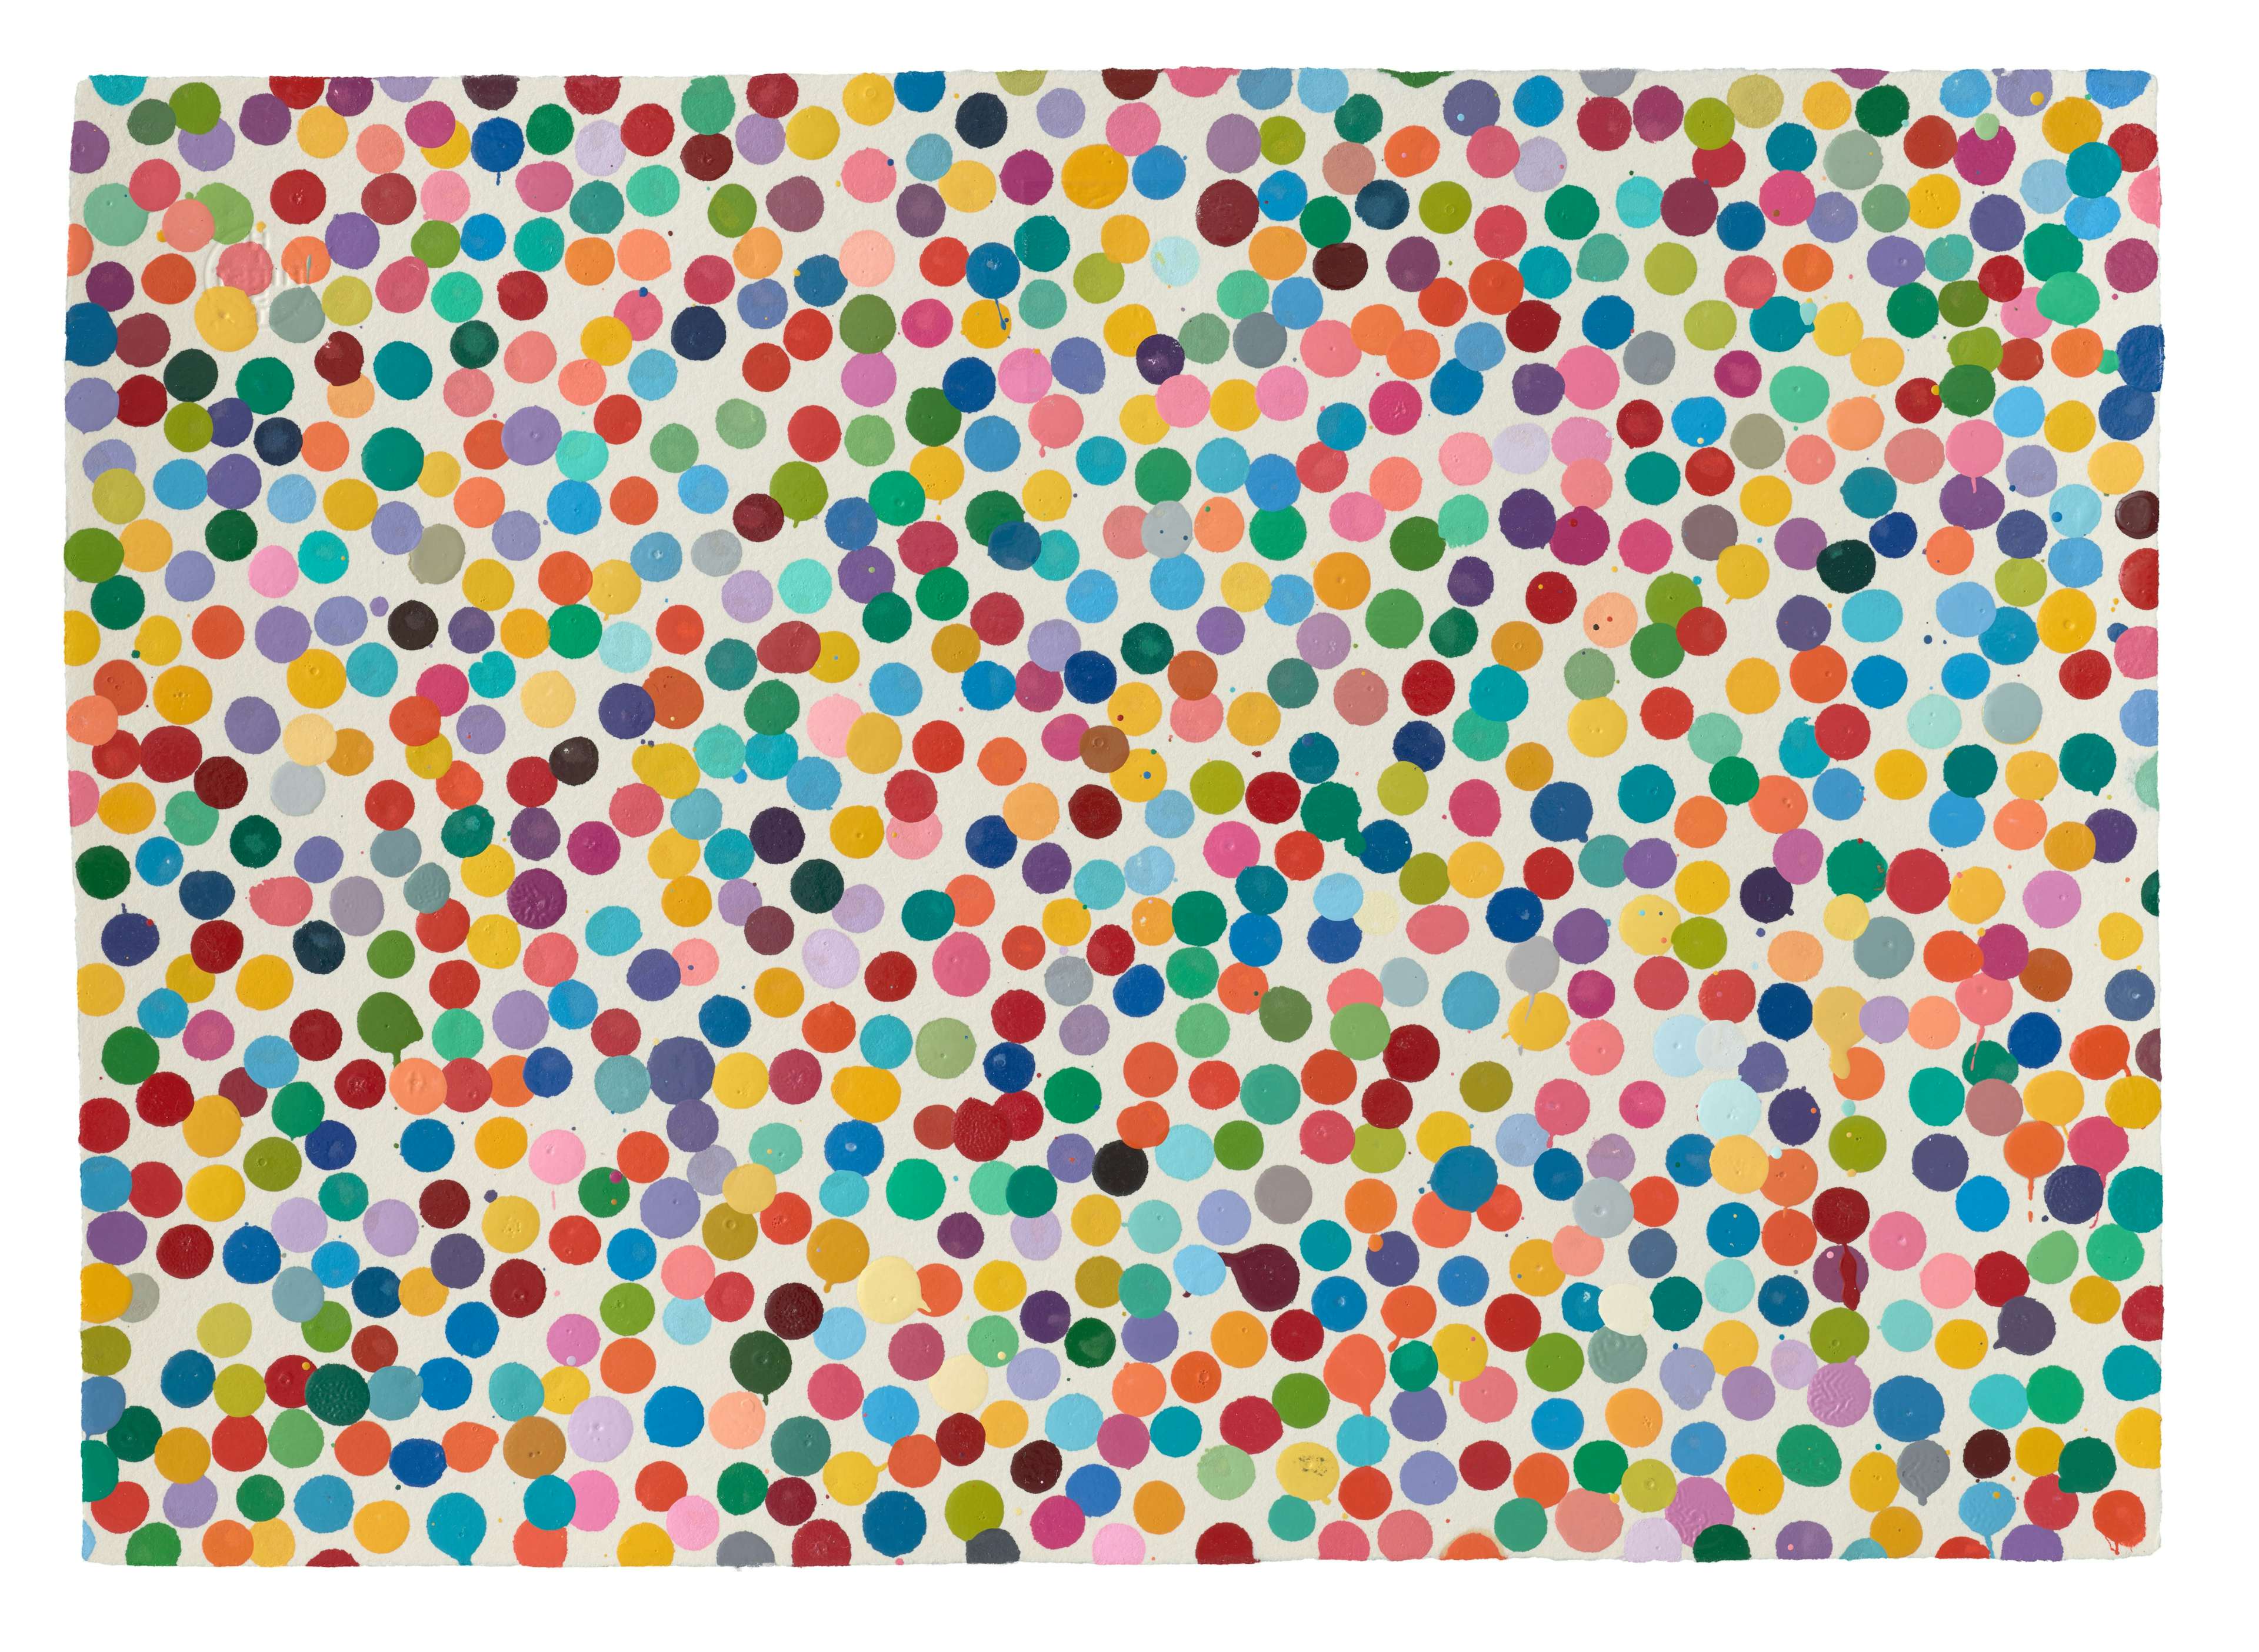 Cover Image for Damien Hirst is Concluding His Currency Experiment With Burning Paintings on Paper